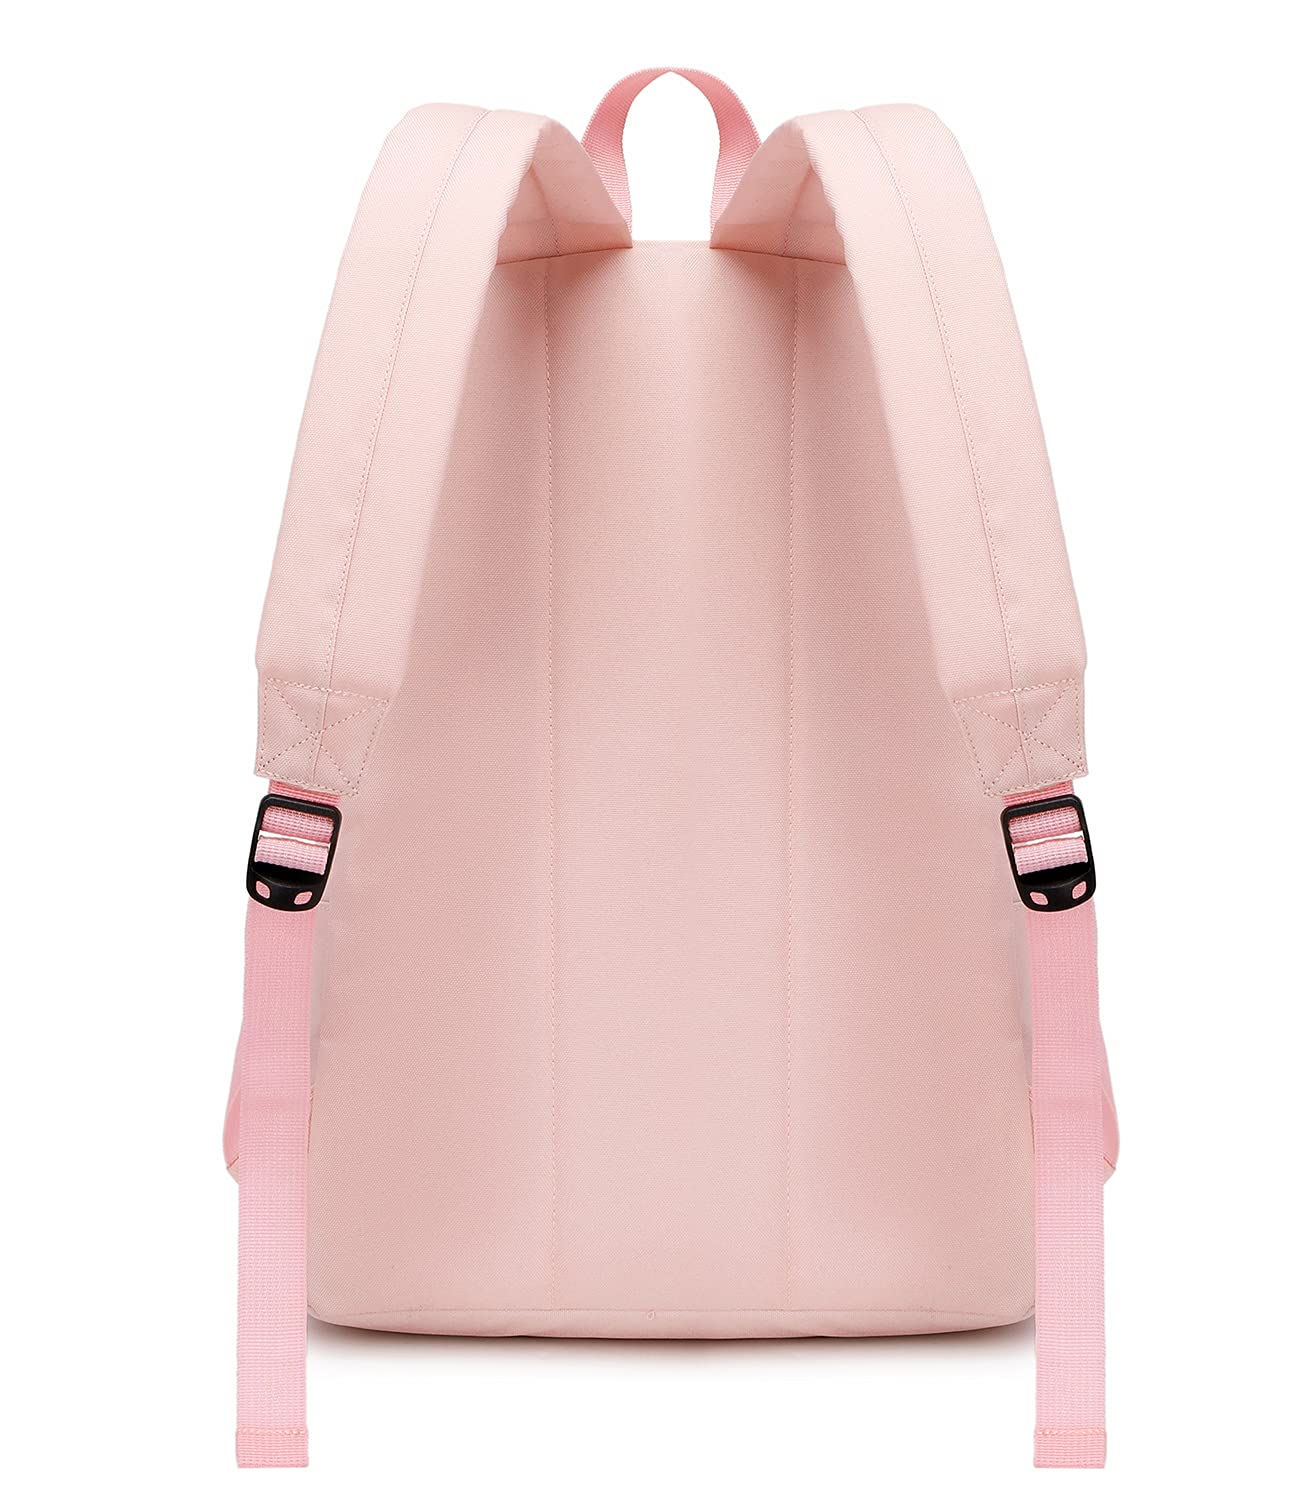 abshoo Lightweight Casual Unisex Backpack for School Solid Color Boobags (Light Pink)